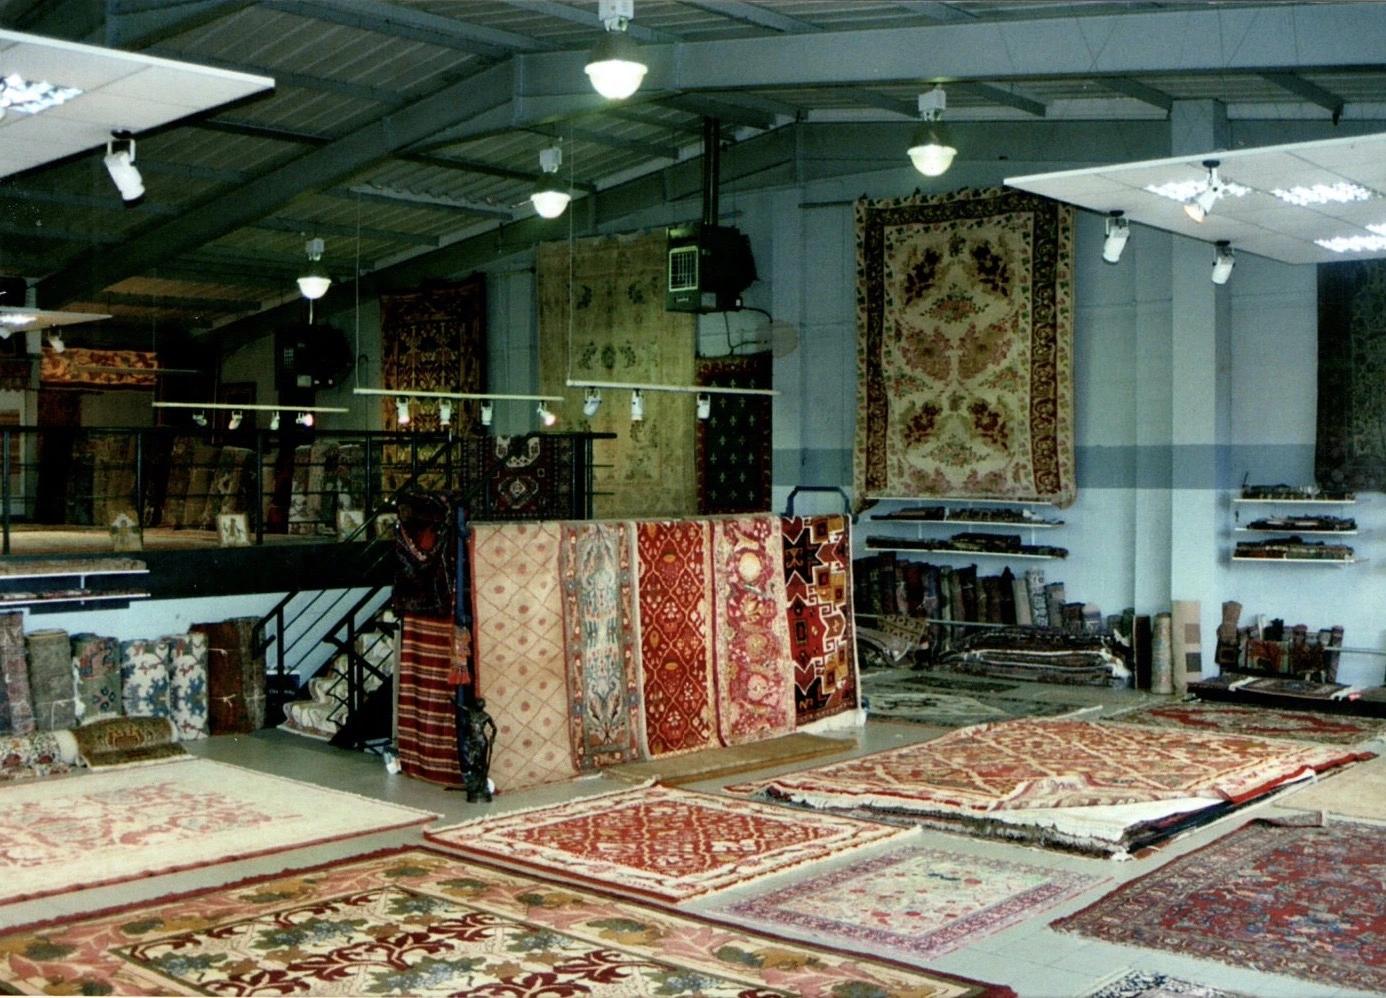 Thames Carpets moves to Newtown Road, Henley-on-Thames, 2002 - The original showroom was located on Reading Road, Henley-on-Thames by Christ Church